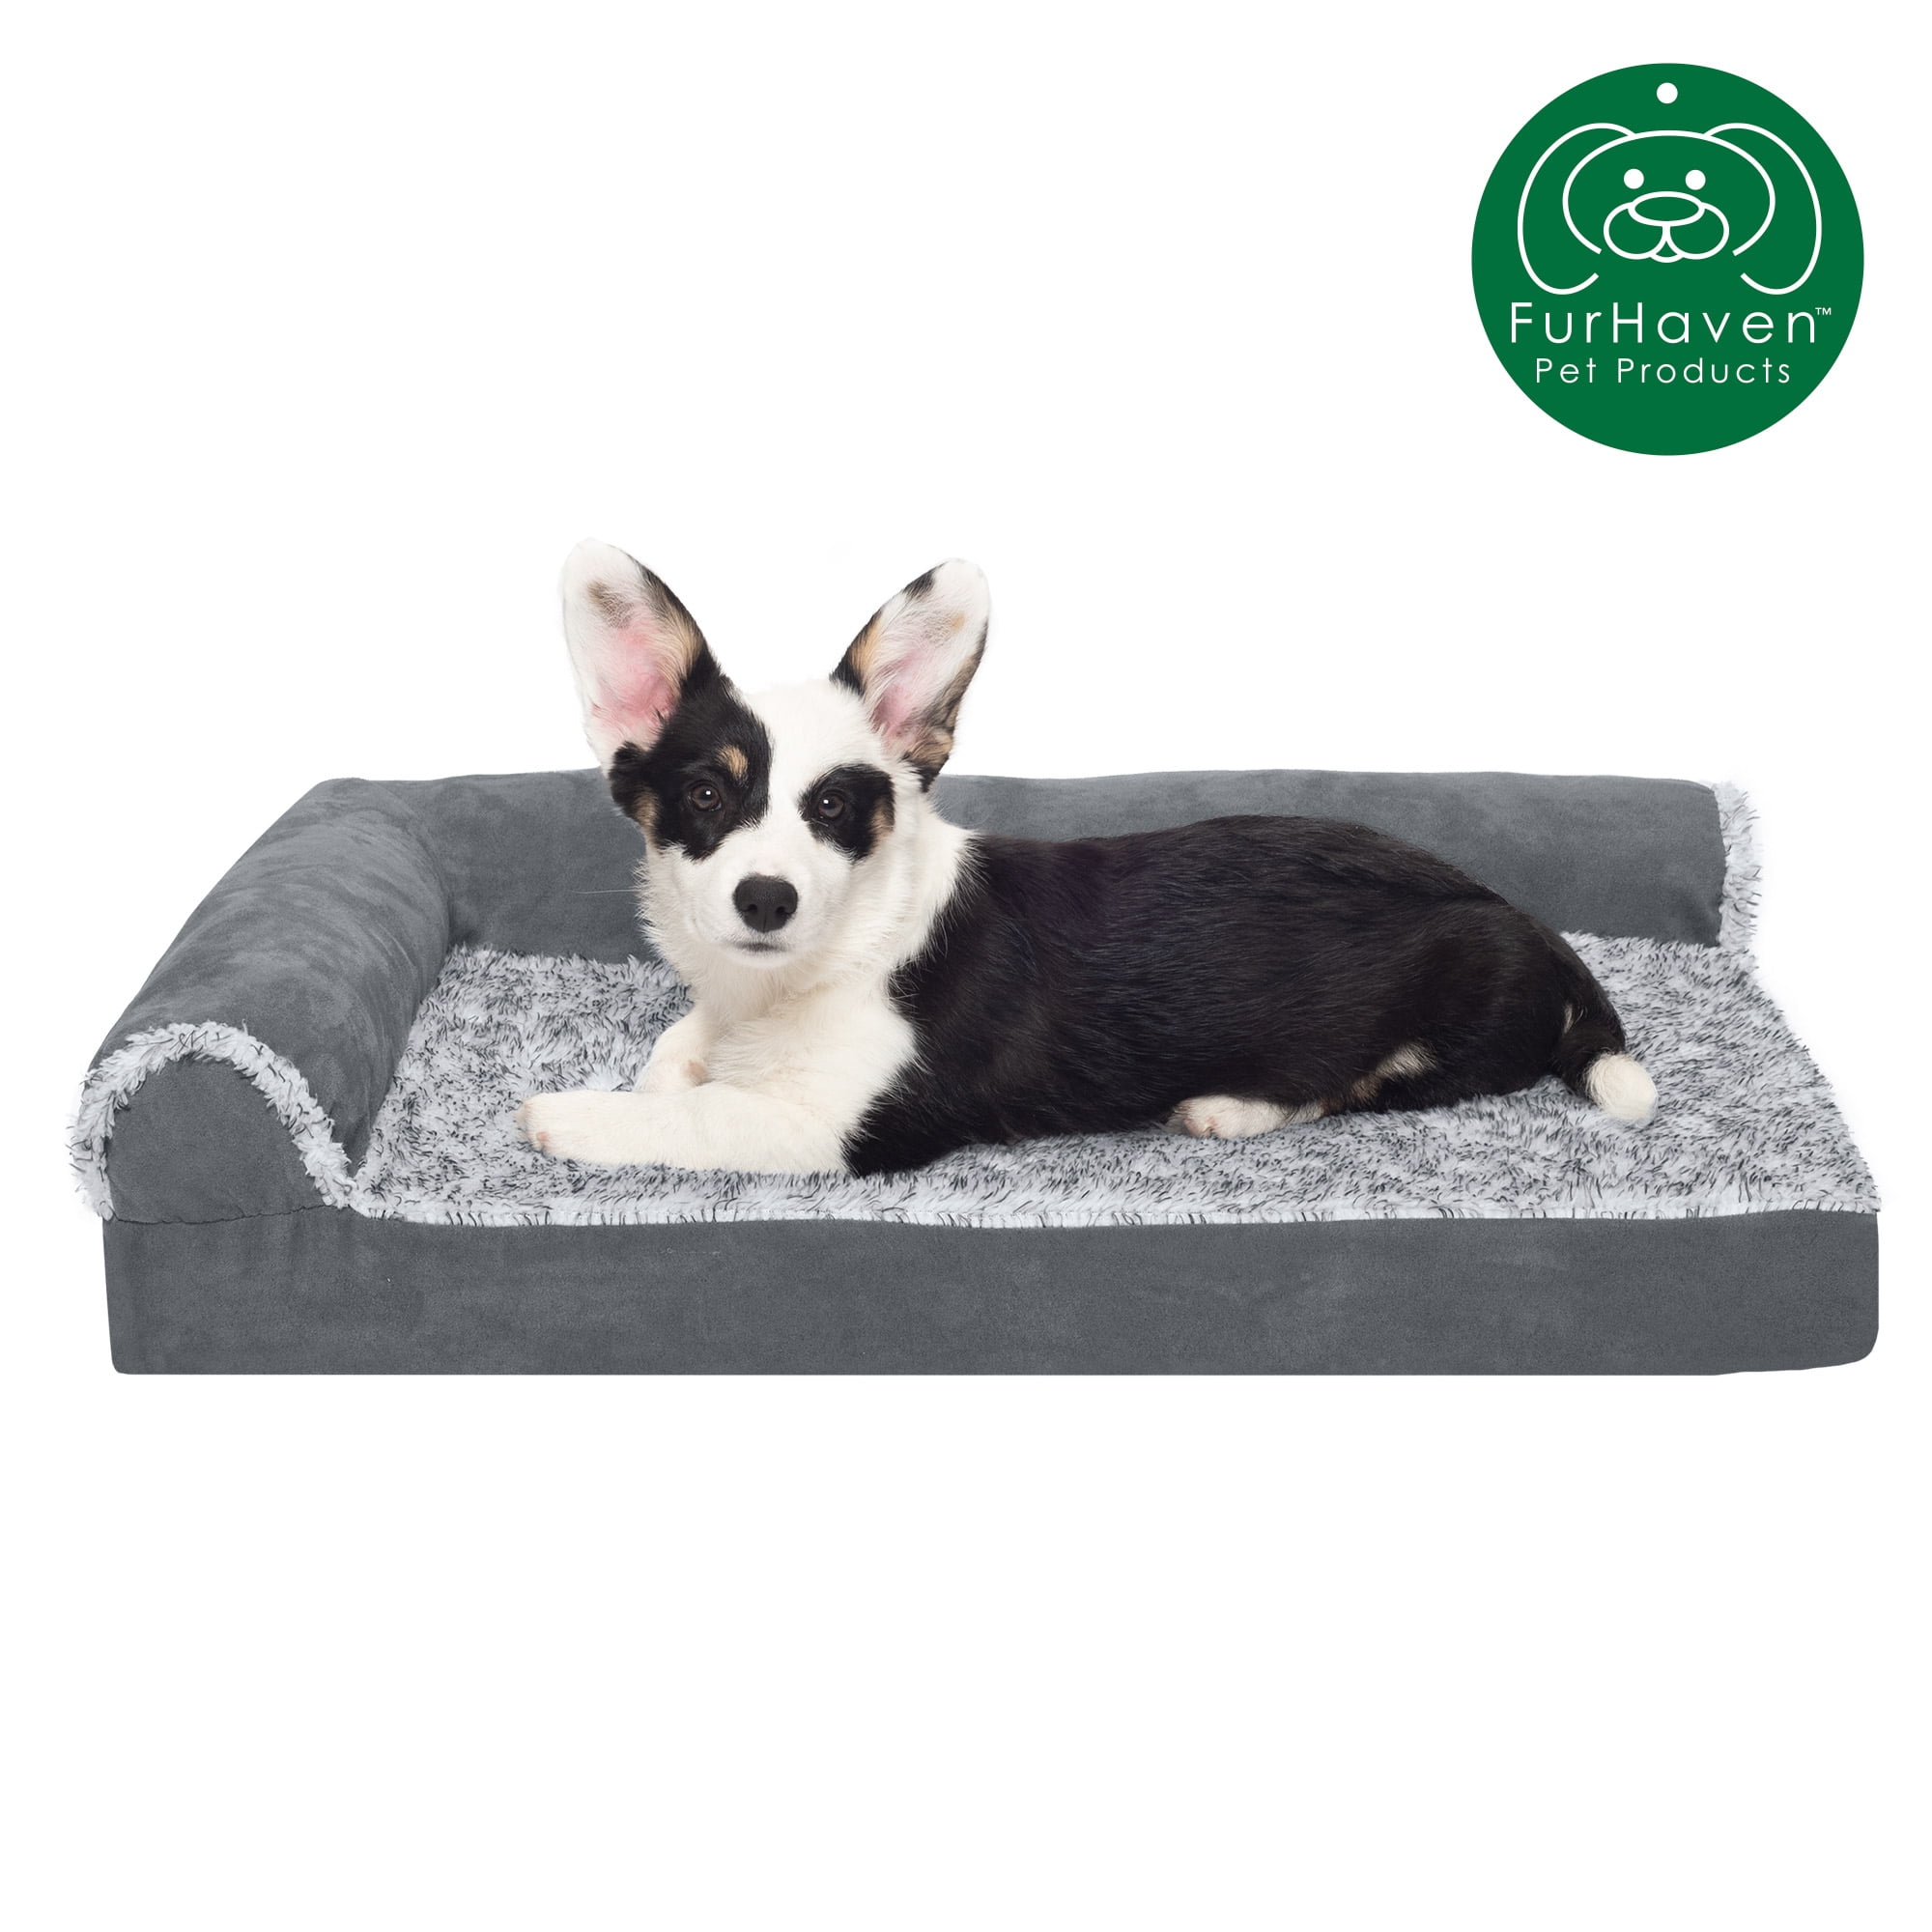 FurHaven Pet Products Deluxe Orthopedic Couch Pet Bed for Dogs & Cats, Stone Gray, Medium